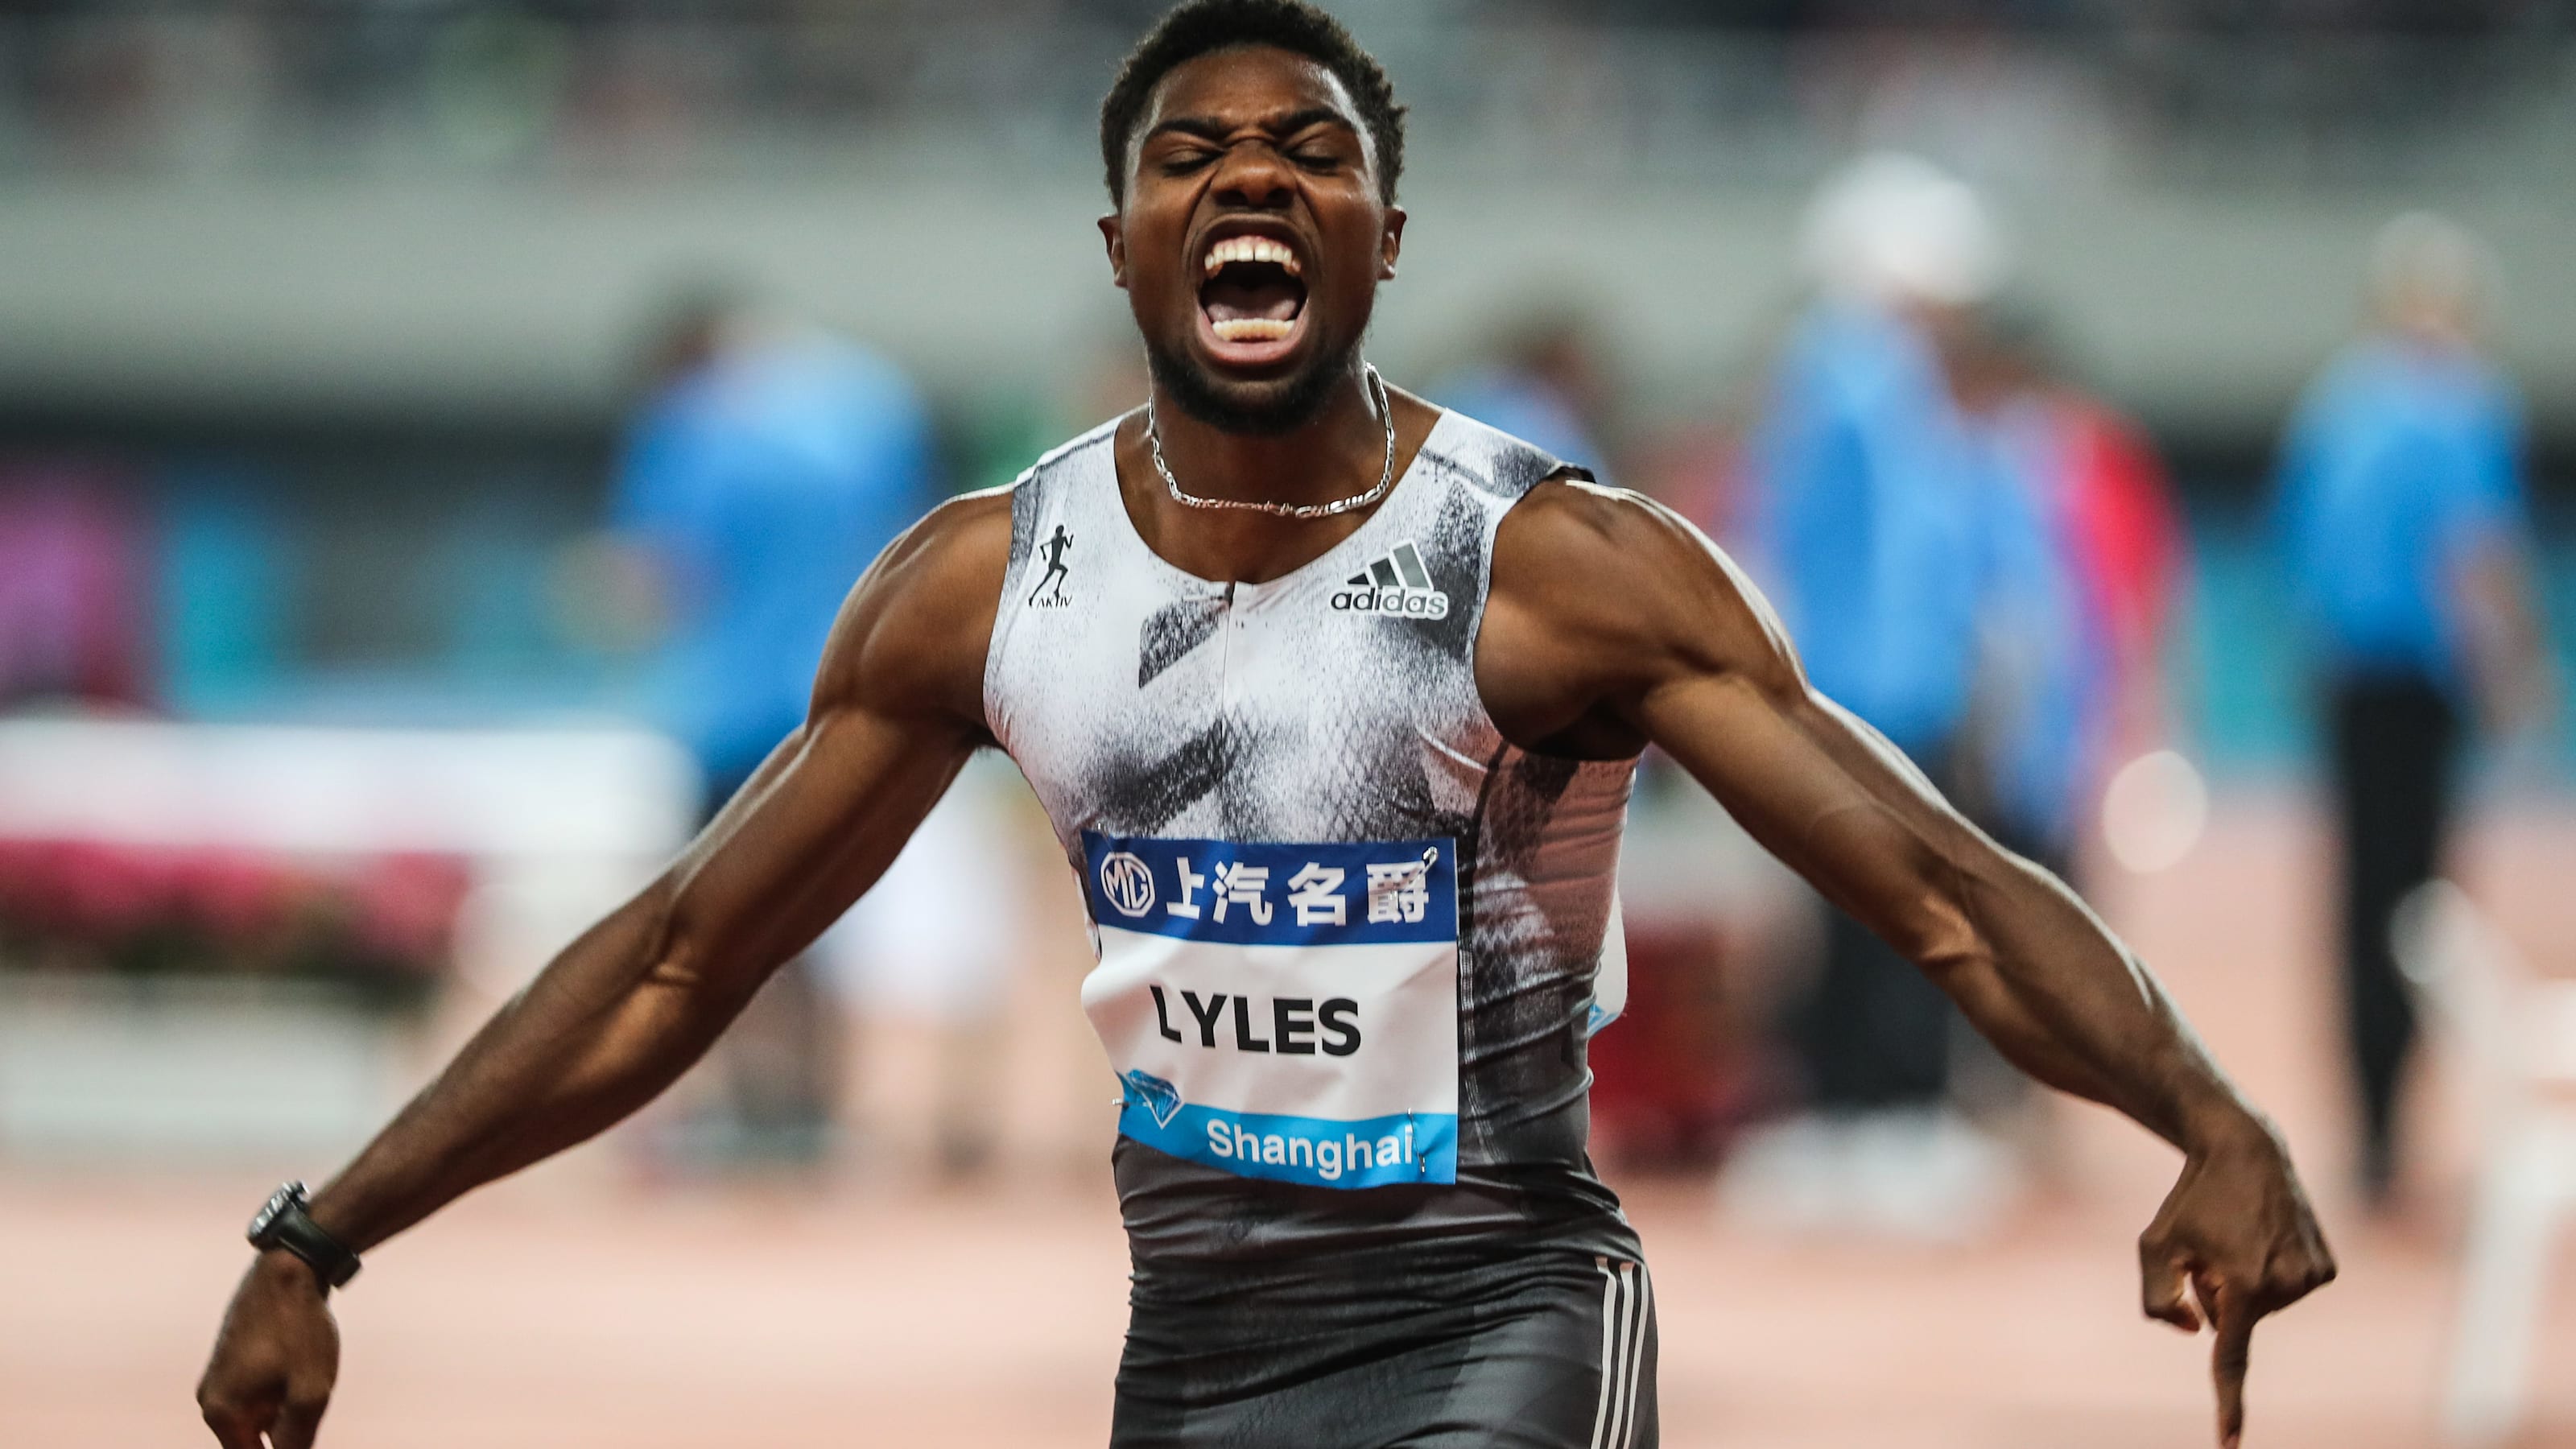 IAAF India Day 7 LIVE: All eyes on Neeraj Chopra in javelin throw as Shelley-Ann Fraser-Pryce and Noah Lyles target gold in 200m final, three Indians for triple jump, follow IAAF World Championships live